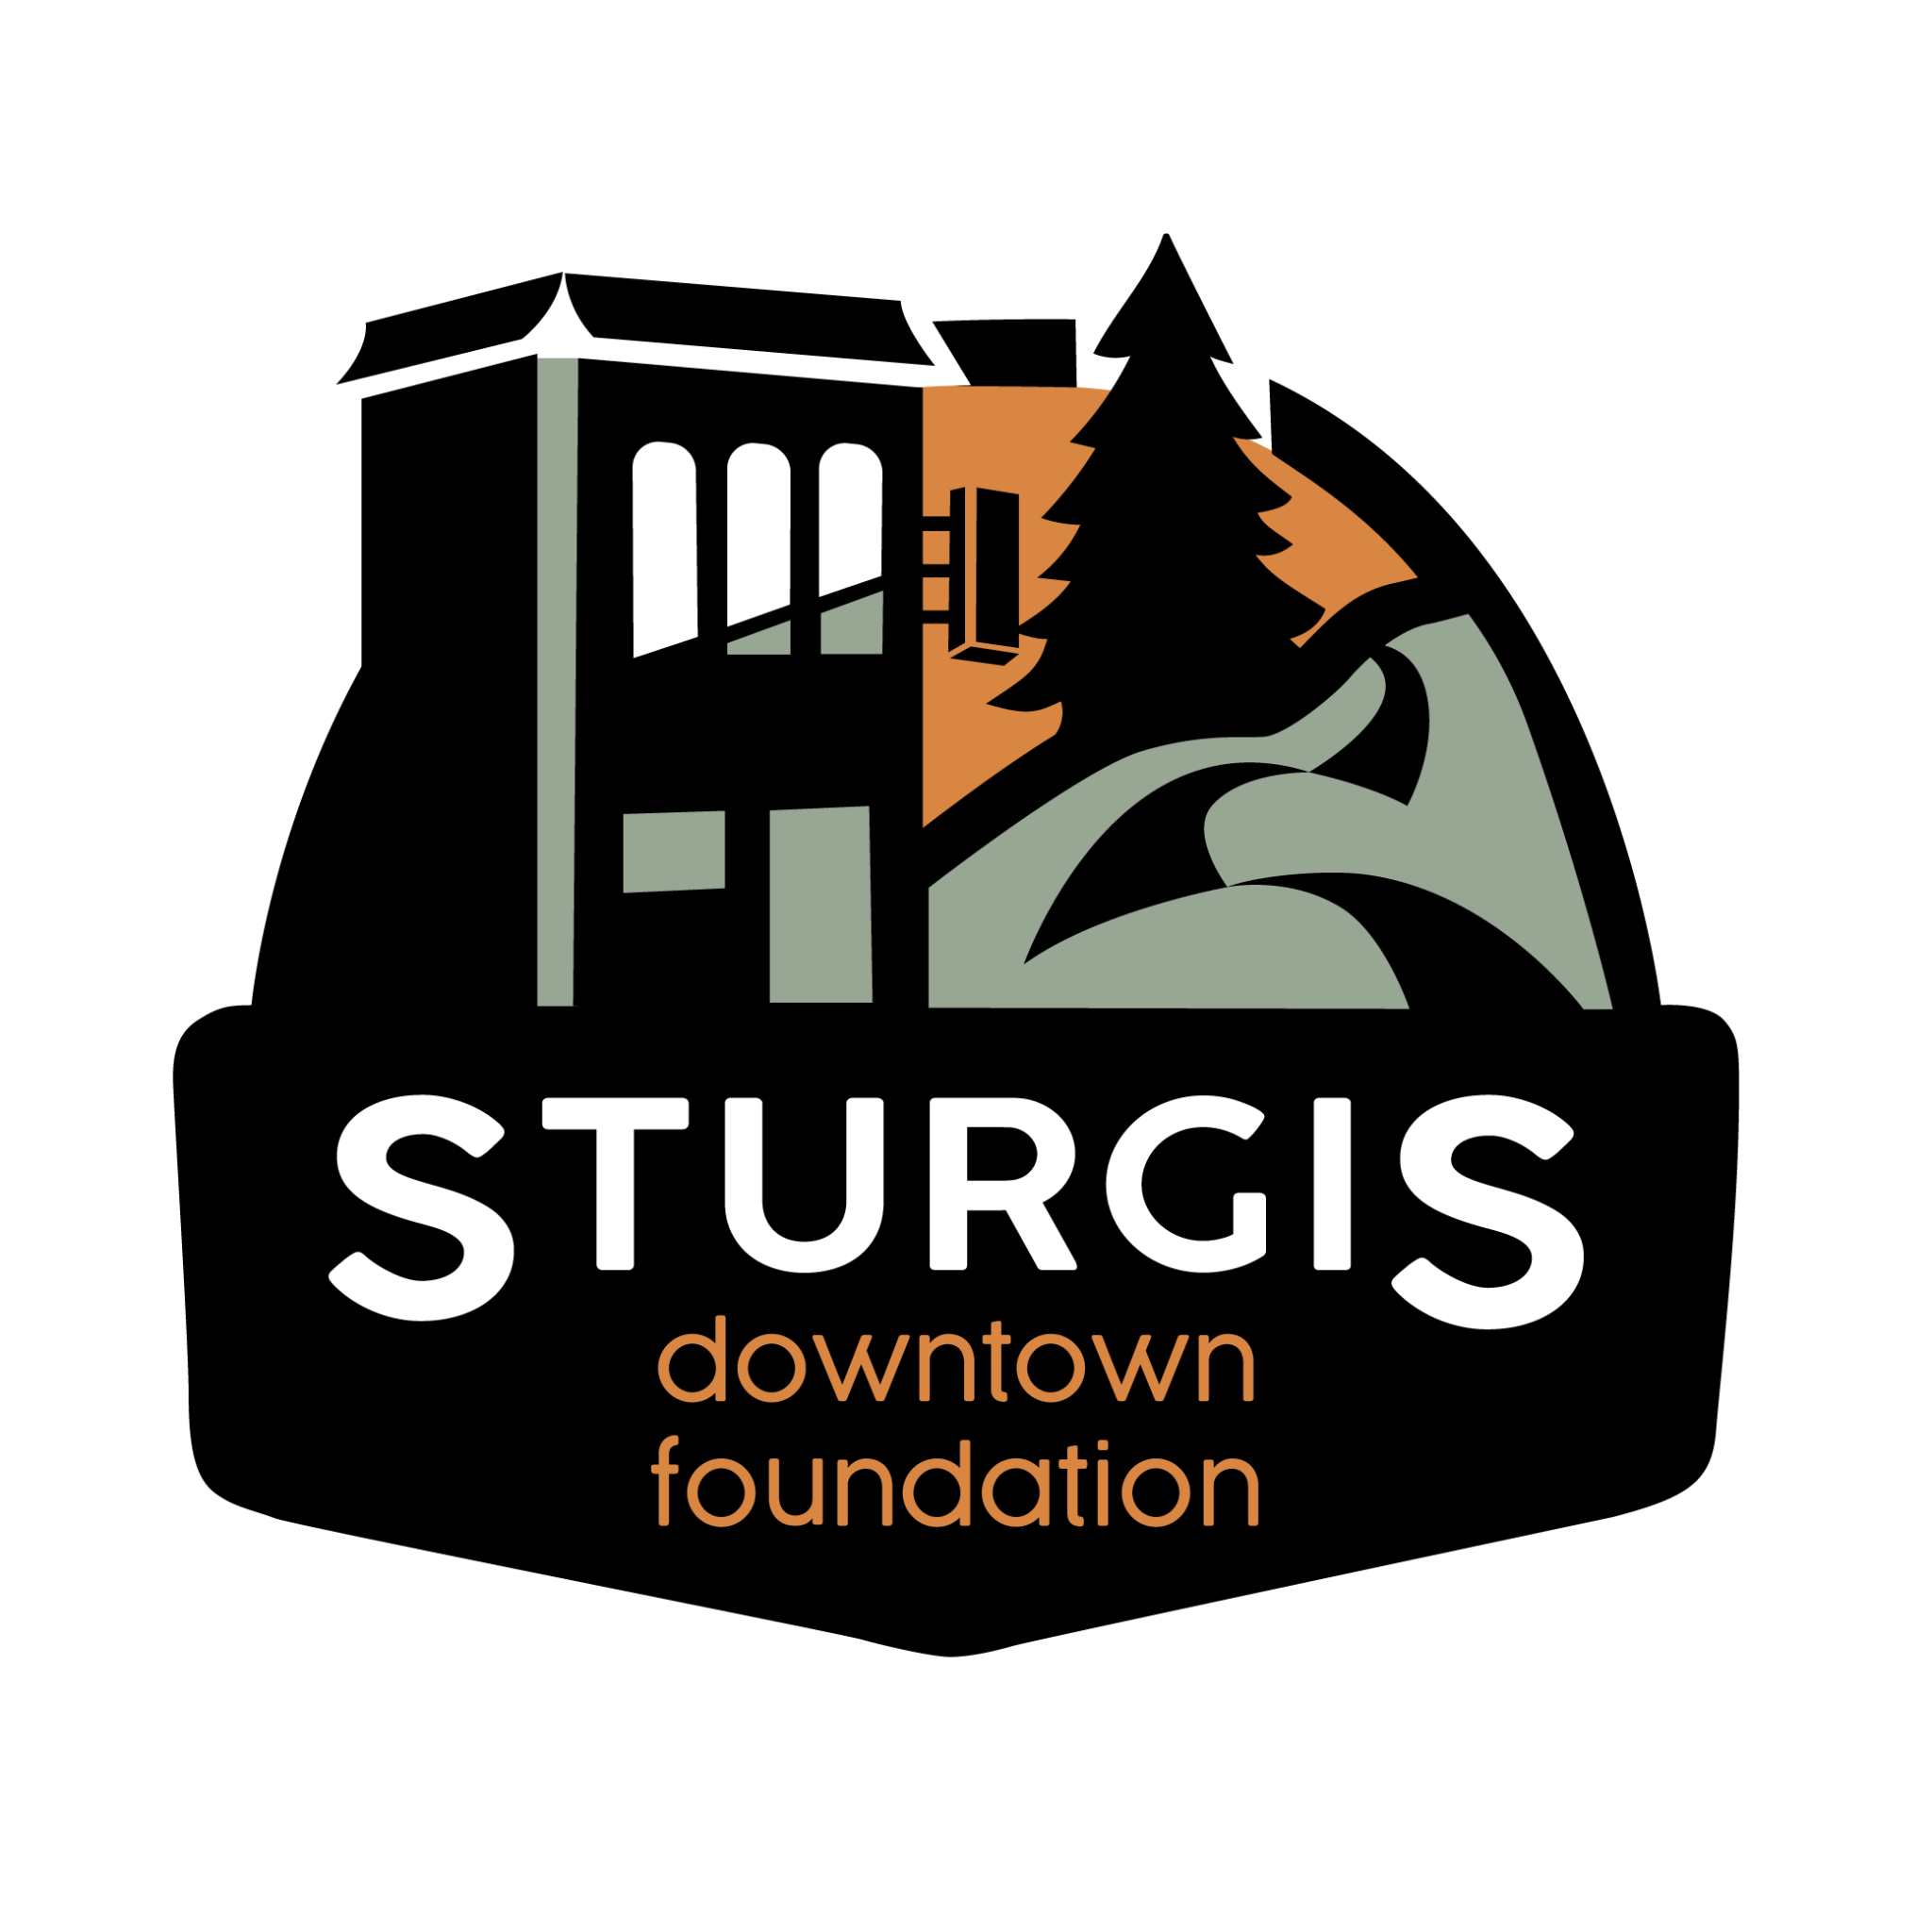 Contact Downtown Sturgis Foundation